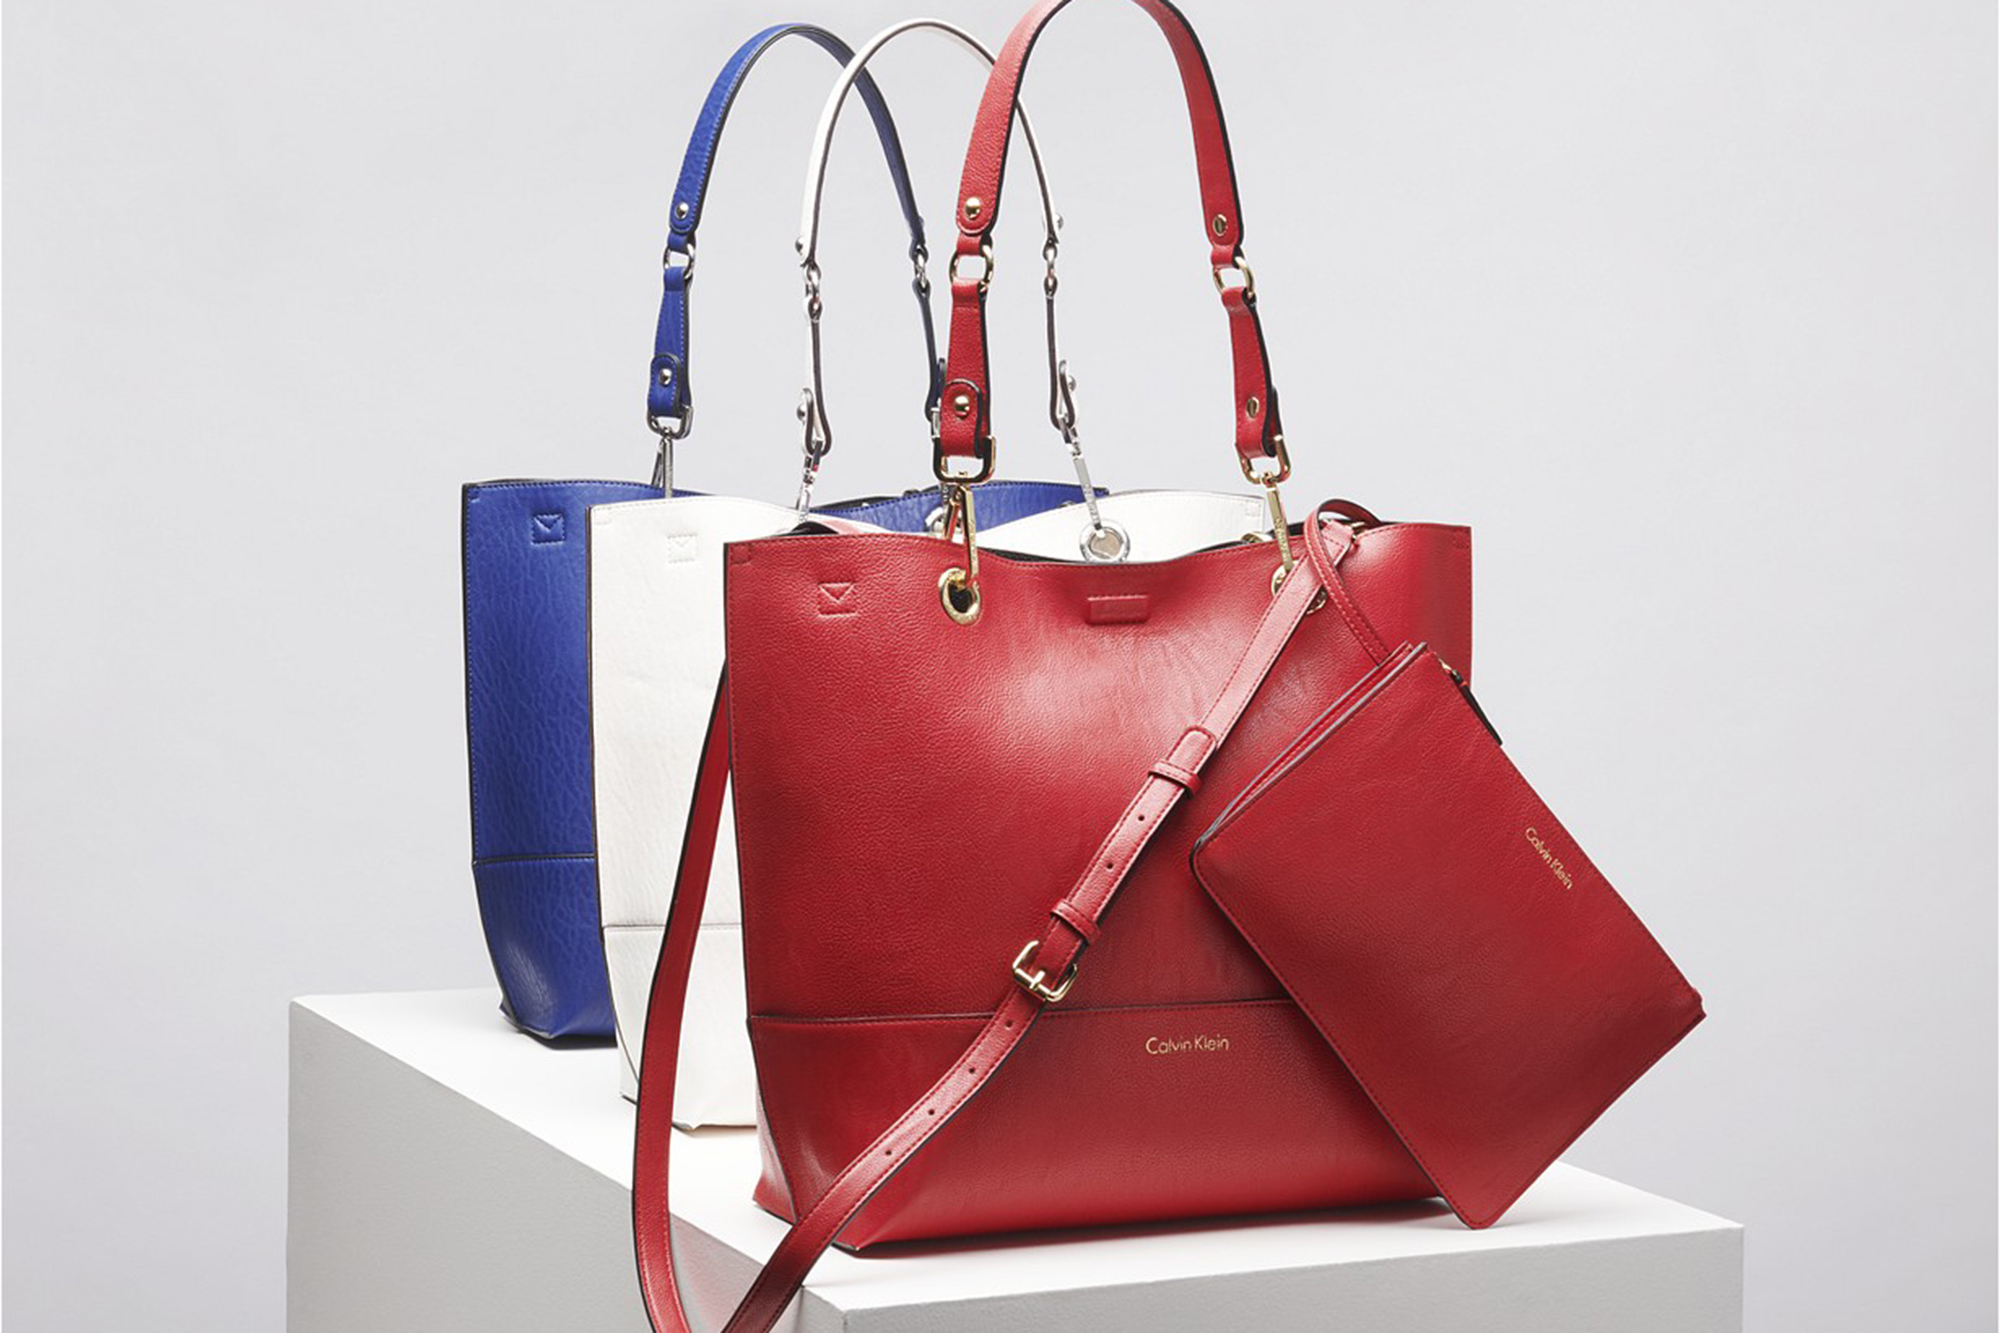 Melodieus middernacht Op de grond Be Twice as Chic With This Reversible Calvin Klein Tote